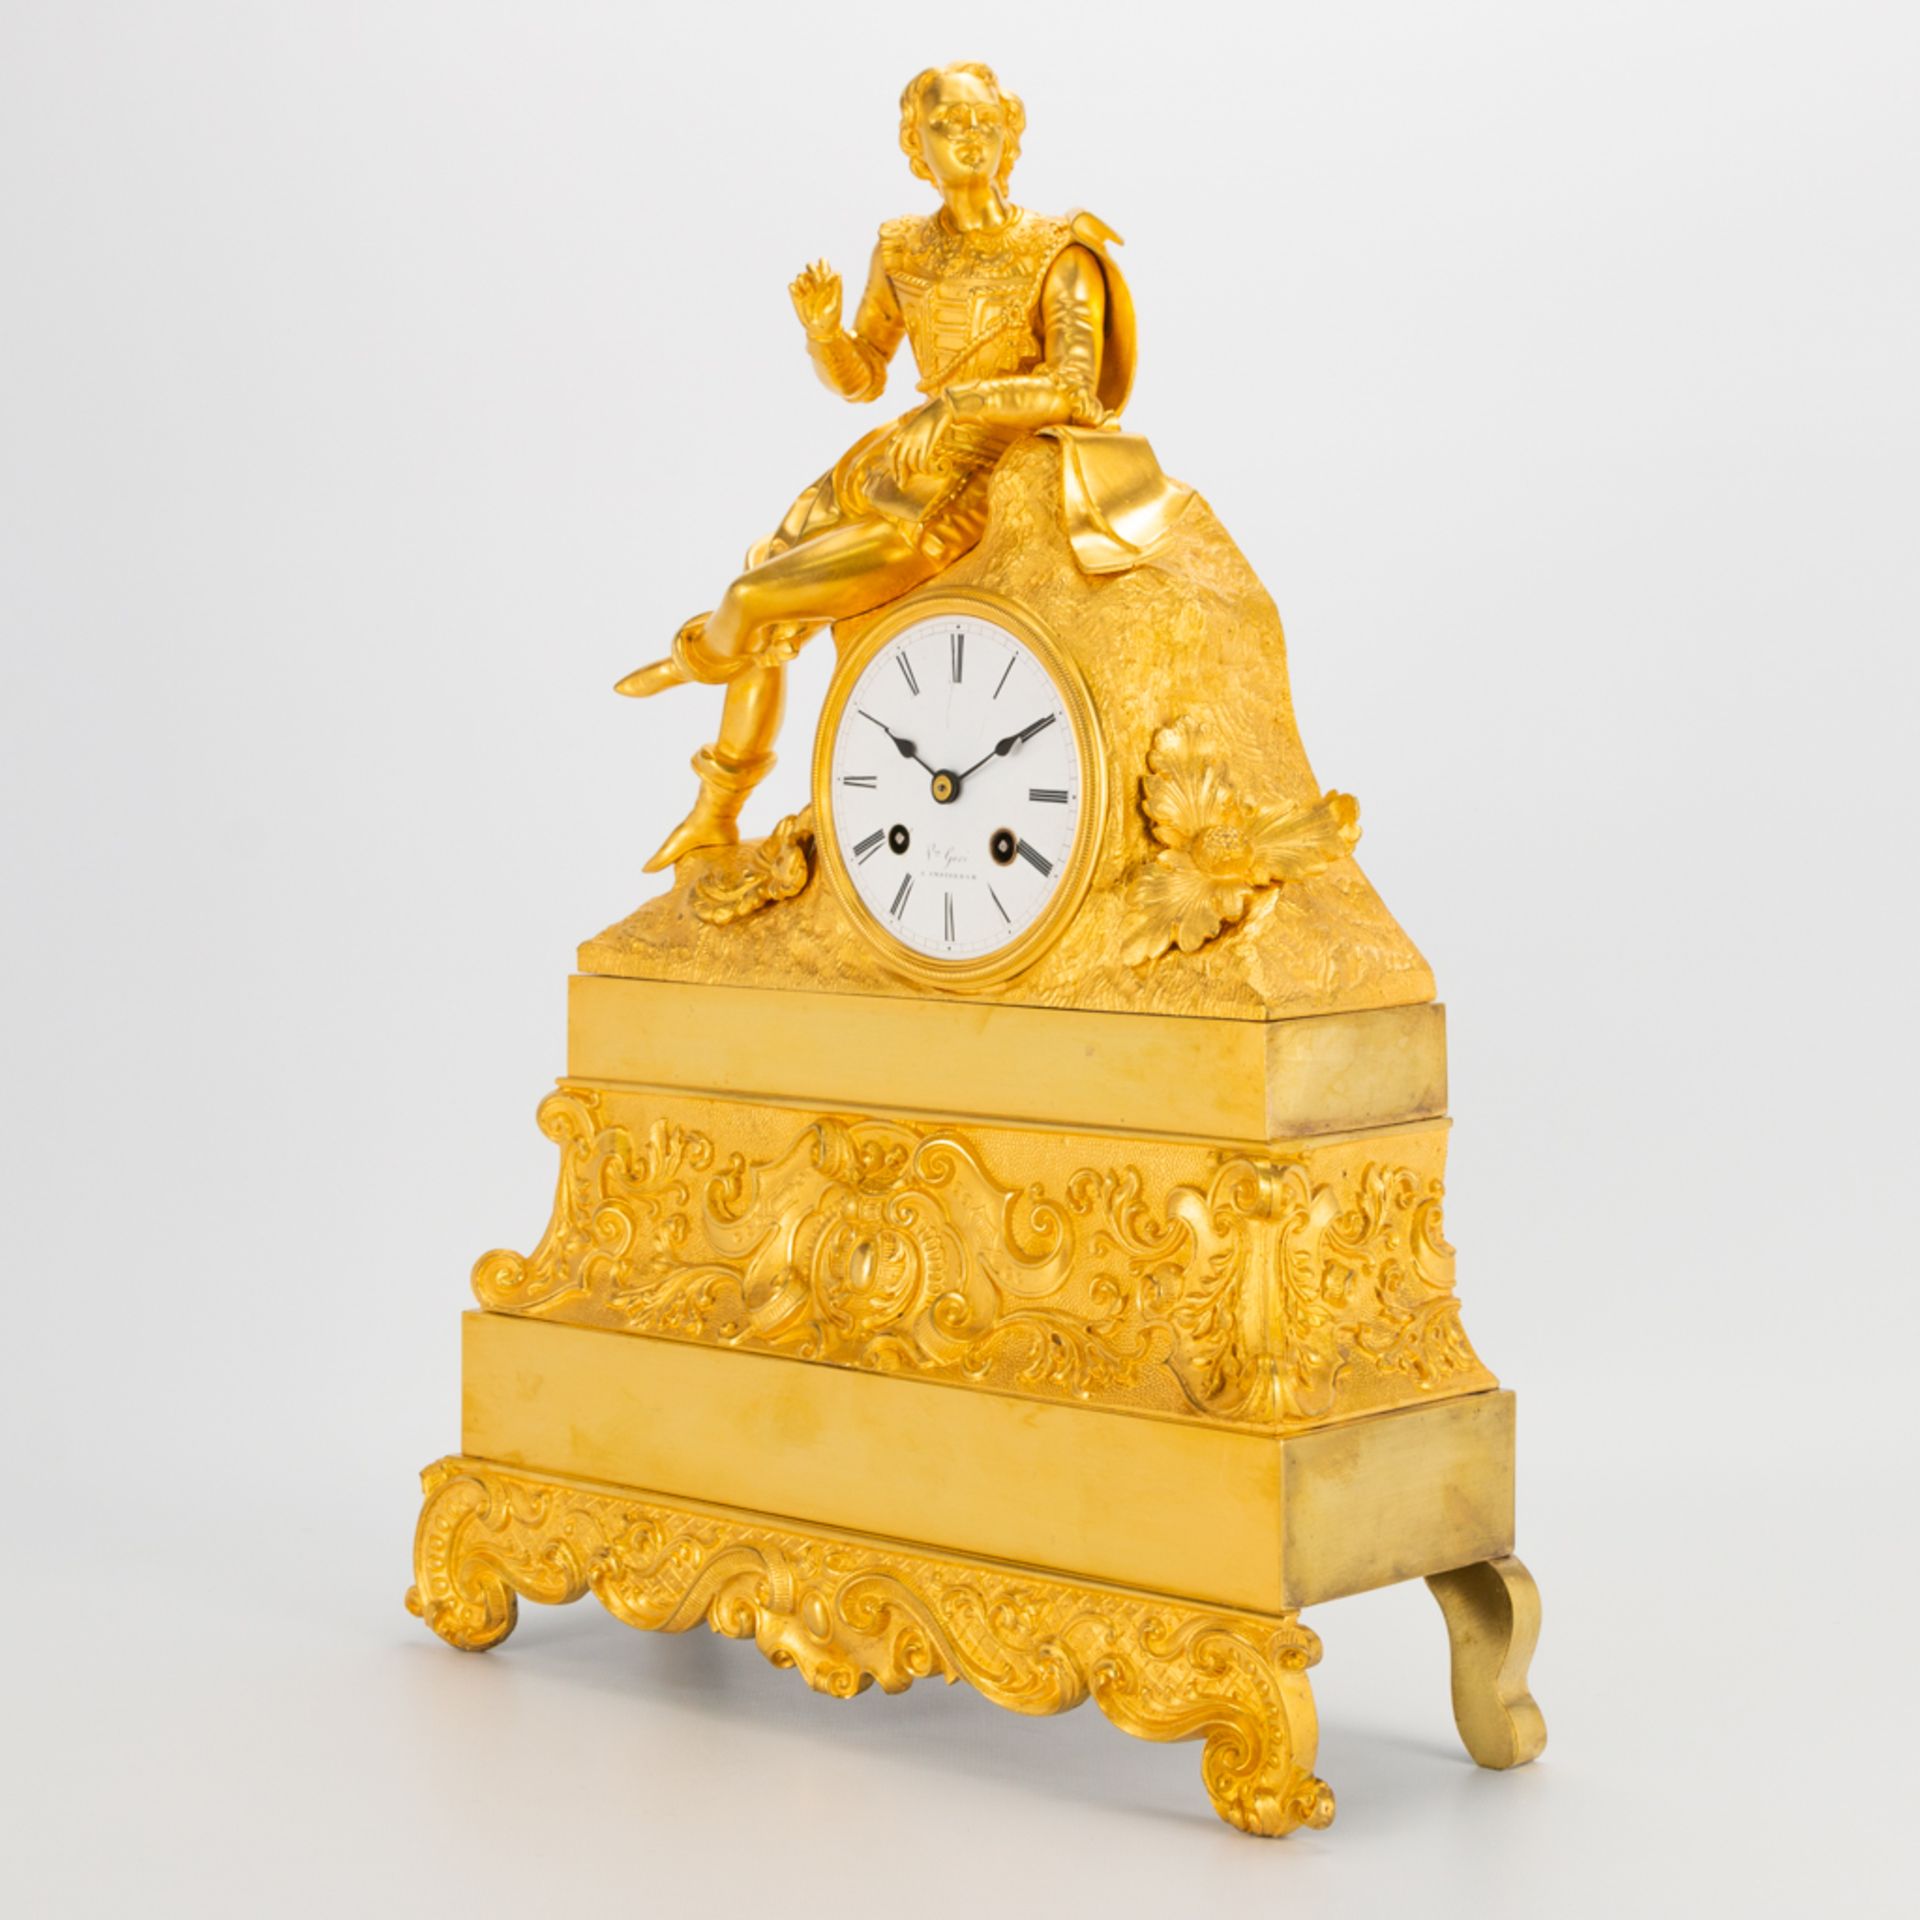 A ormolu gilt table clock made of bronze with a figurine of a noble man, enamel dial and marked Amst - Image 10 of 16